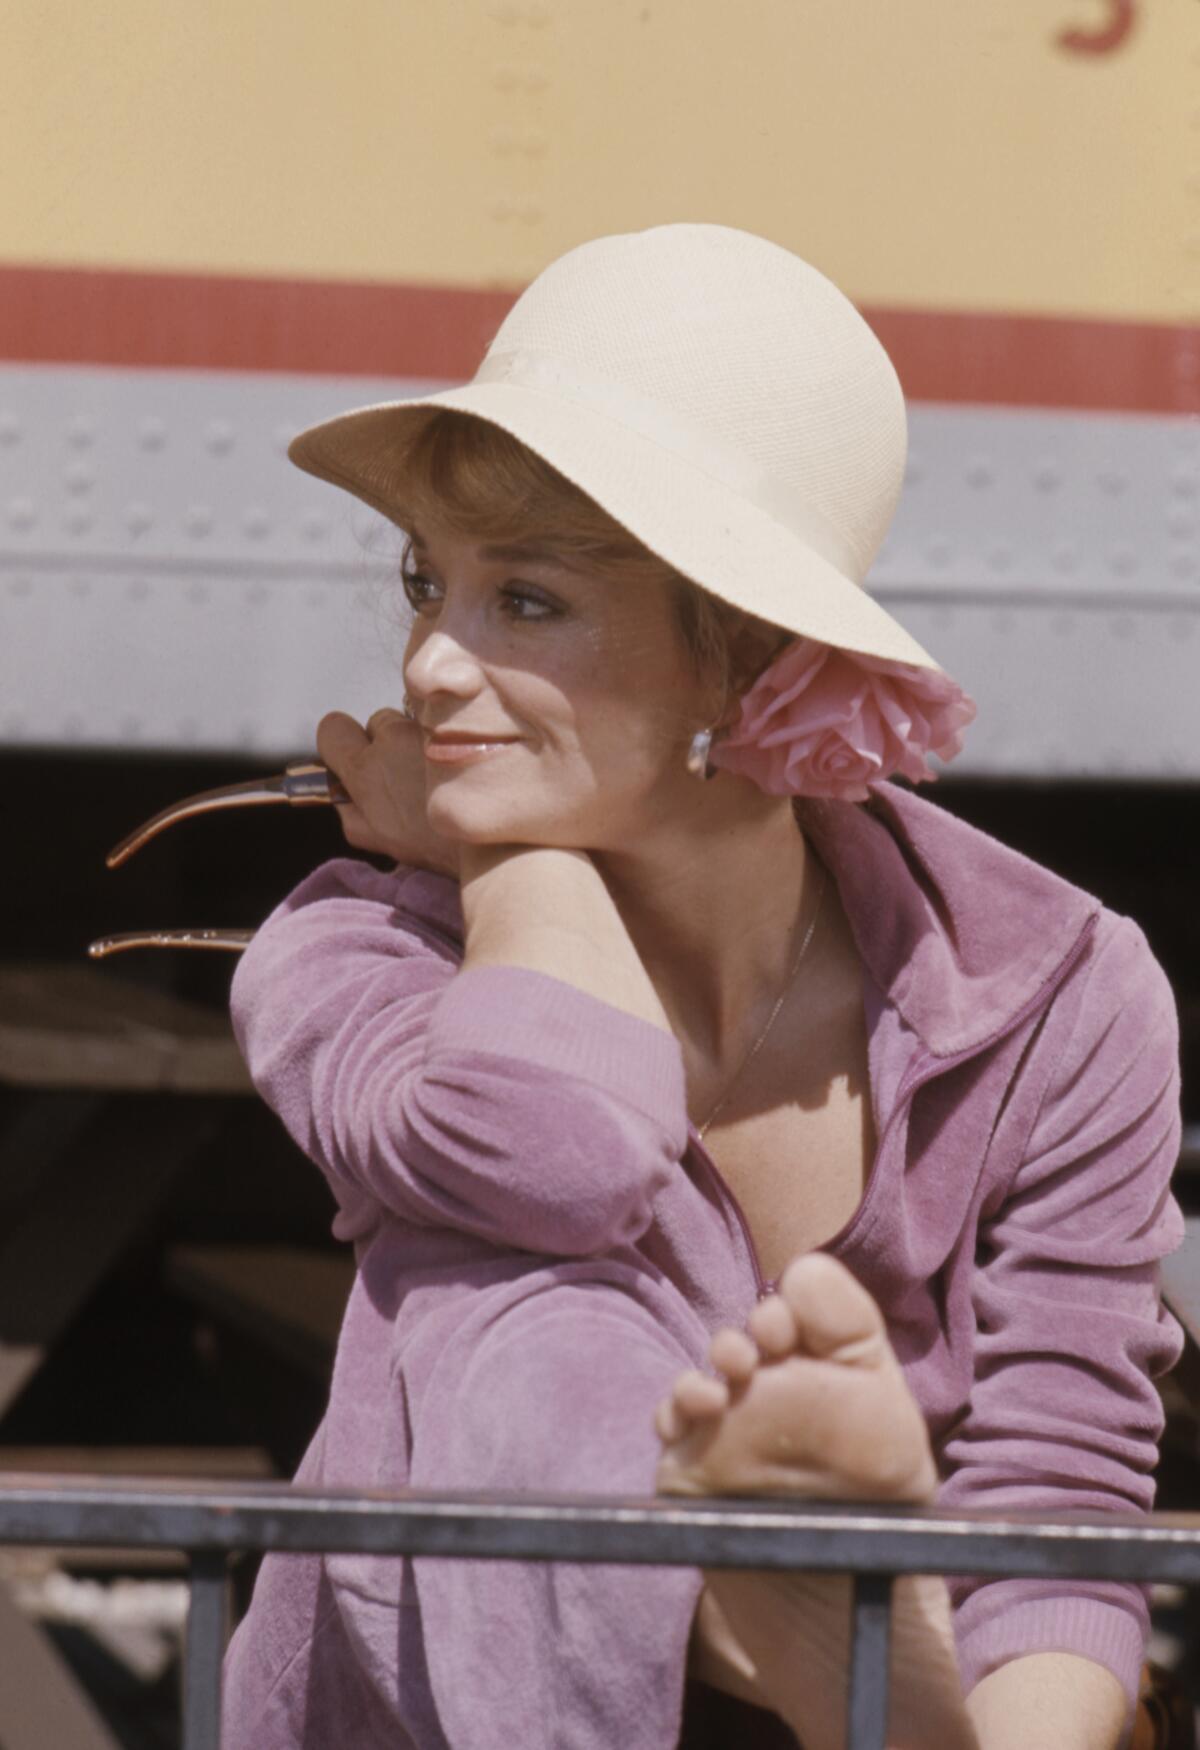 Lynne Marta, in a hat, has a relaxed smile as she rests her head on her arm, her outstretched foot rests on a metal rail